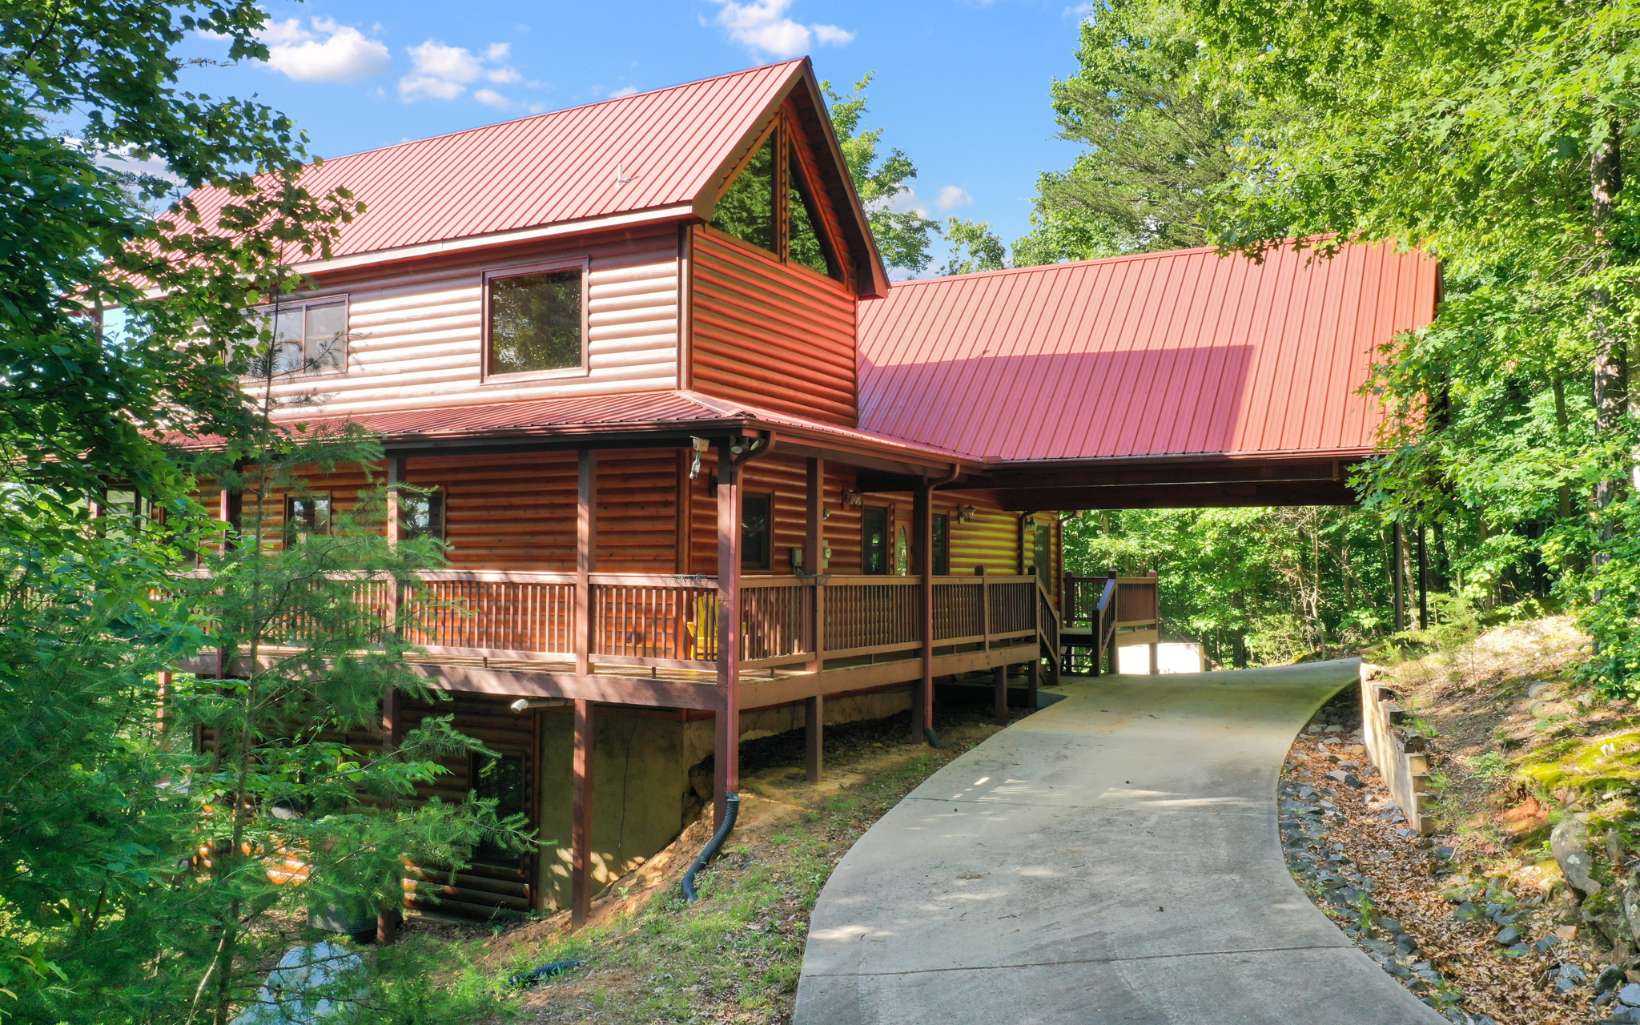 Bring All the Family or your Favorite Friends to this Gorgeous Cabin in the North Ga. Mountains situated on one of the highest peaks around. 3 BR/ 3 BA Log Sided Cabin with a Long-Range Mountain View (Improved with a small amount of tree topping). All paved access & less than 15 minutes to downtown Blue Ridge, Blue Ridge Lake or the Toccoa River. Huge screen porch on the view side, wrap around porches, metal roof. Master offers a private porch, fireplace, spacious master bath, jetted tub & tile shower & double vanities. Actually, you could have 2 masters no problem. The lower-level game room & the living area on the main floor are very accommodating for several people to gather. Prepare your meals while enjoying the mountain view, then sit at the separate dining area, same great view. On demand hot water, Plenty of parking here, circle drive with log carport + detached garage.